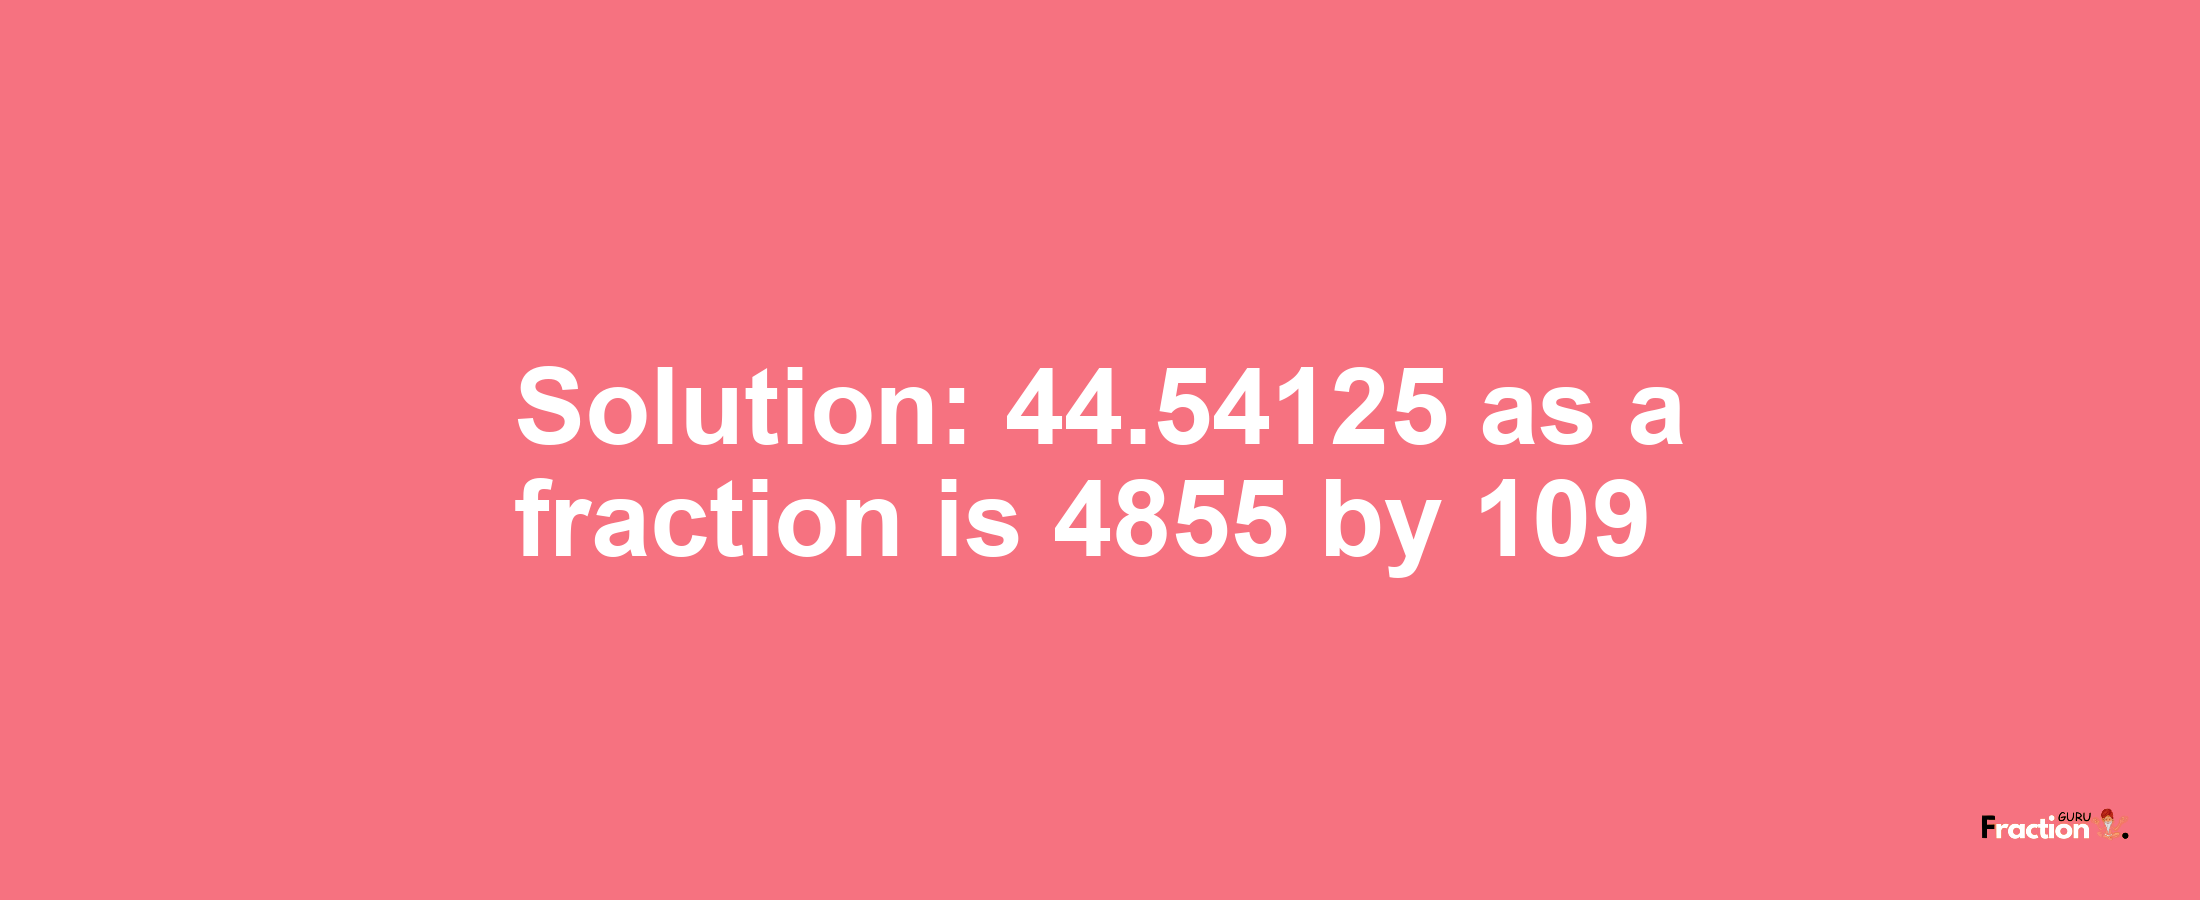 Solution:44.54125 as a fraction is 4855/109